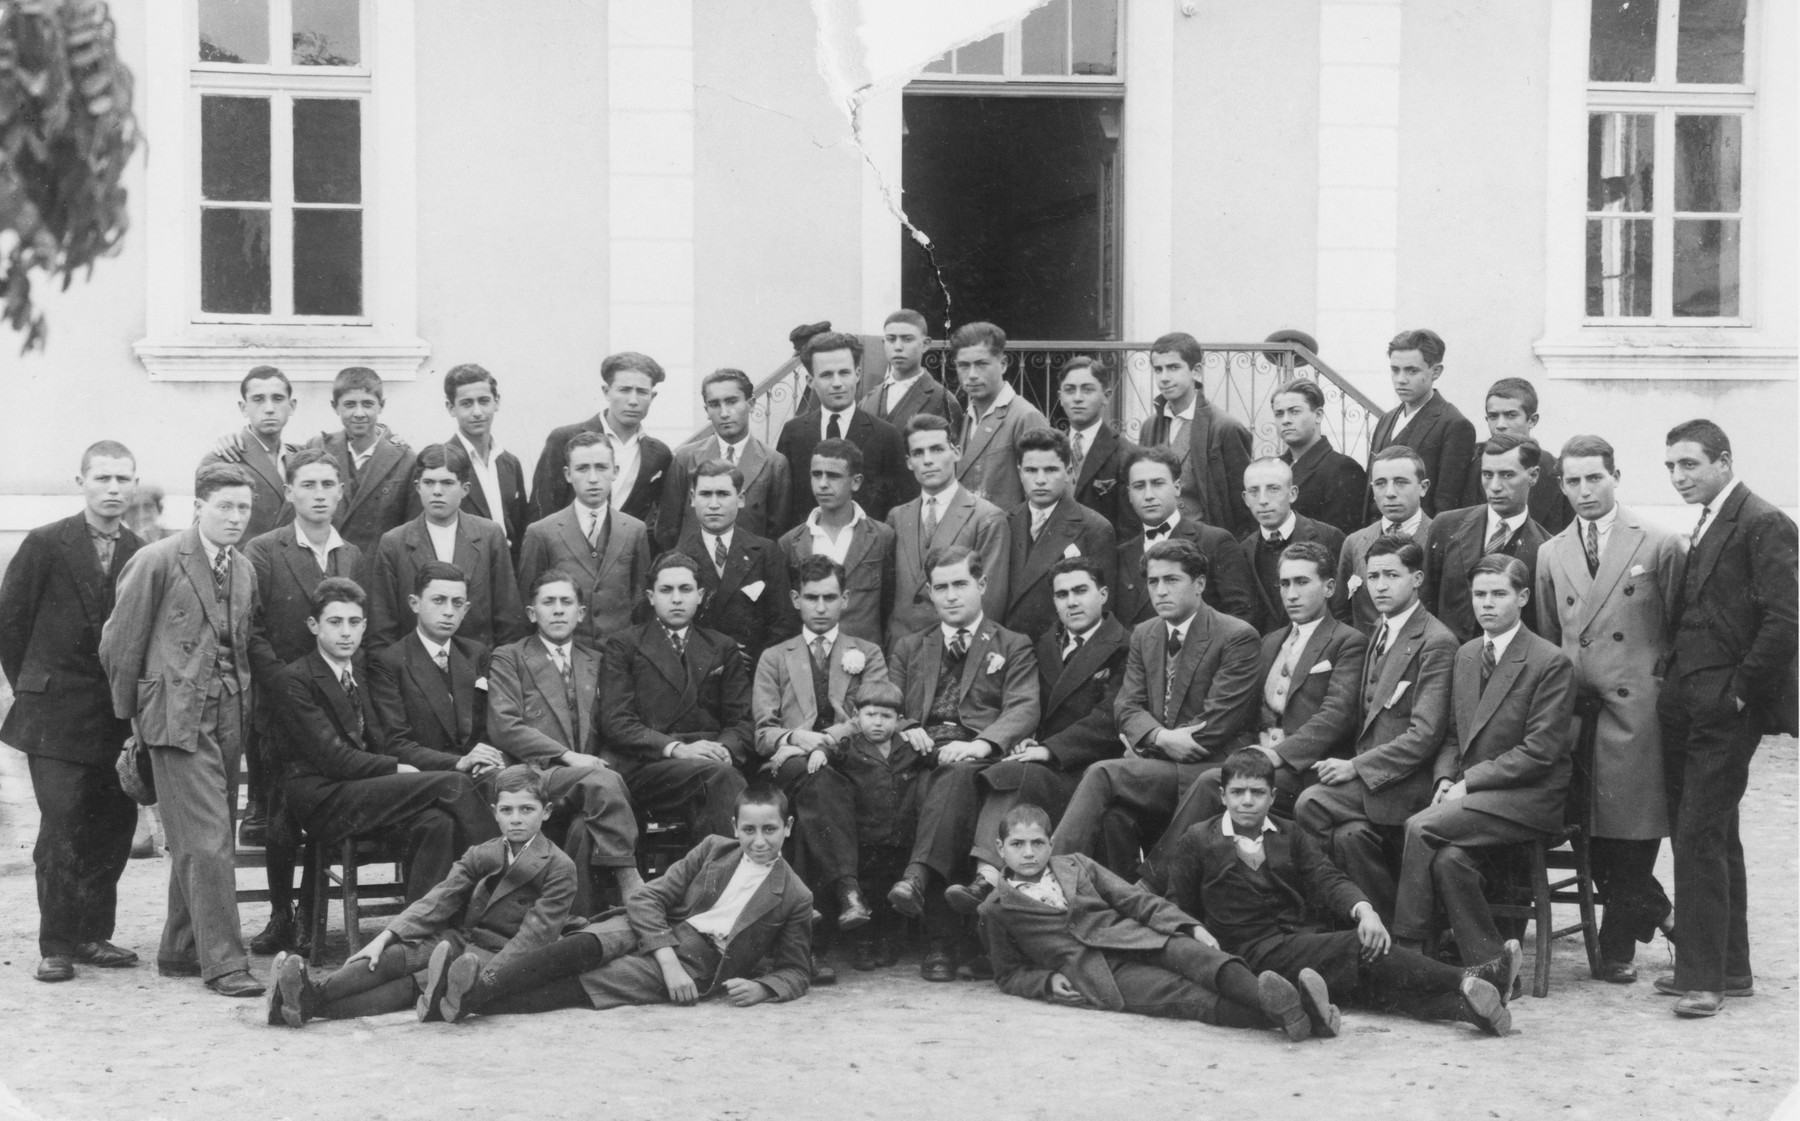 Group portrait of [what probably is a boy's school] in Macedonia.